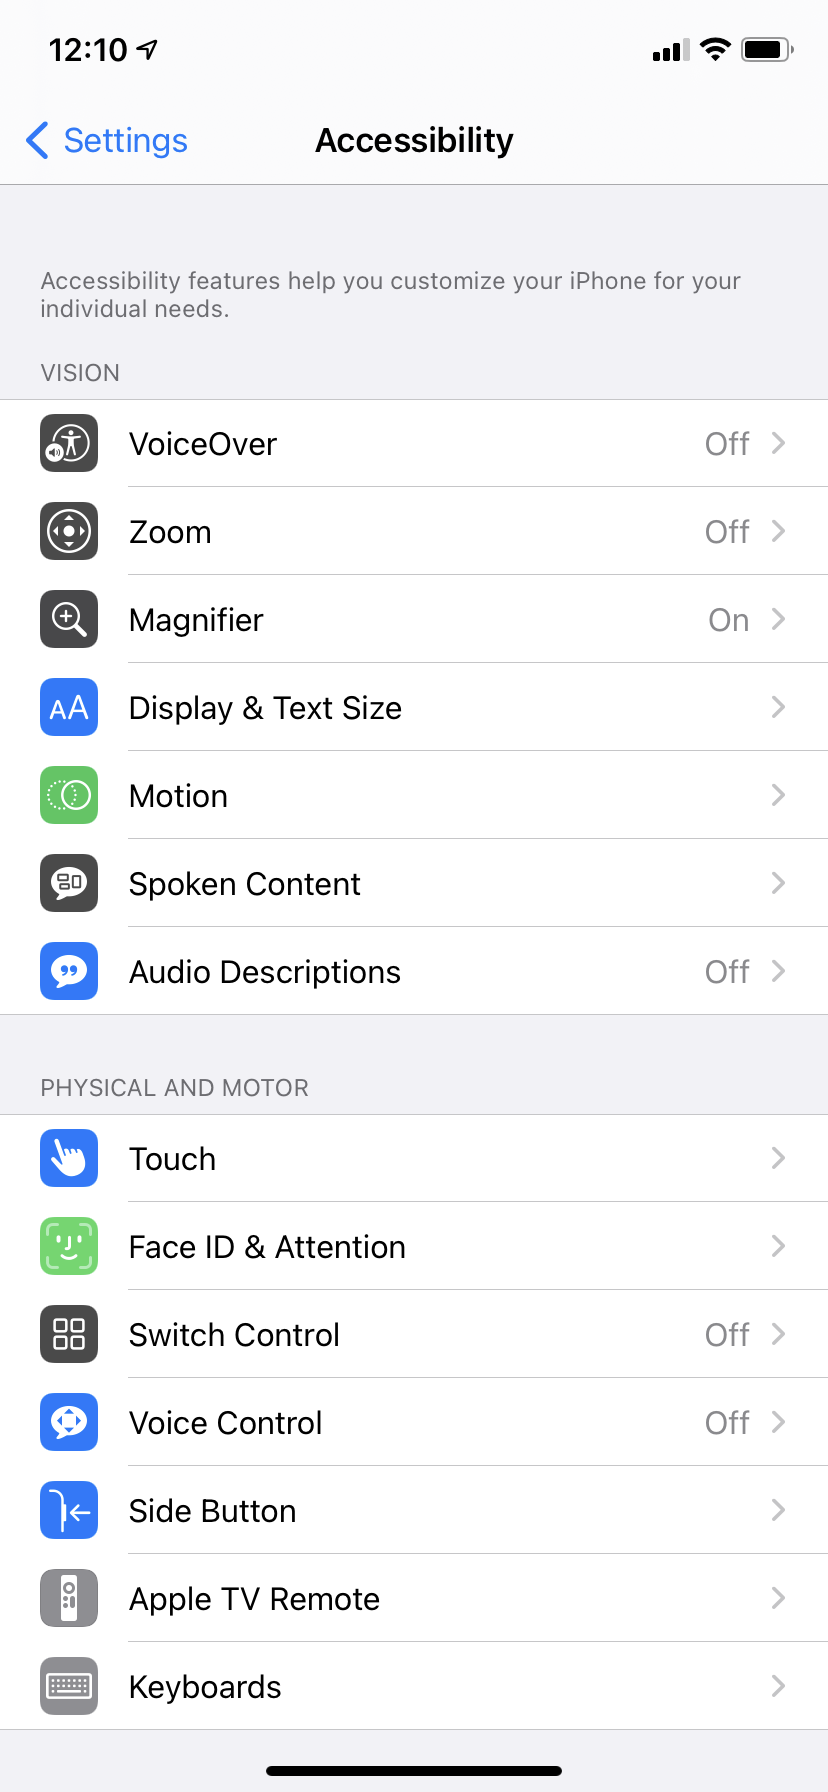 The accessibility menu on an iPhone